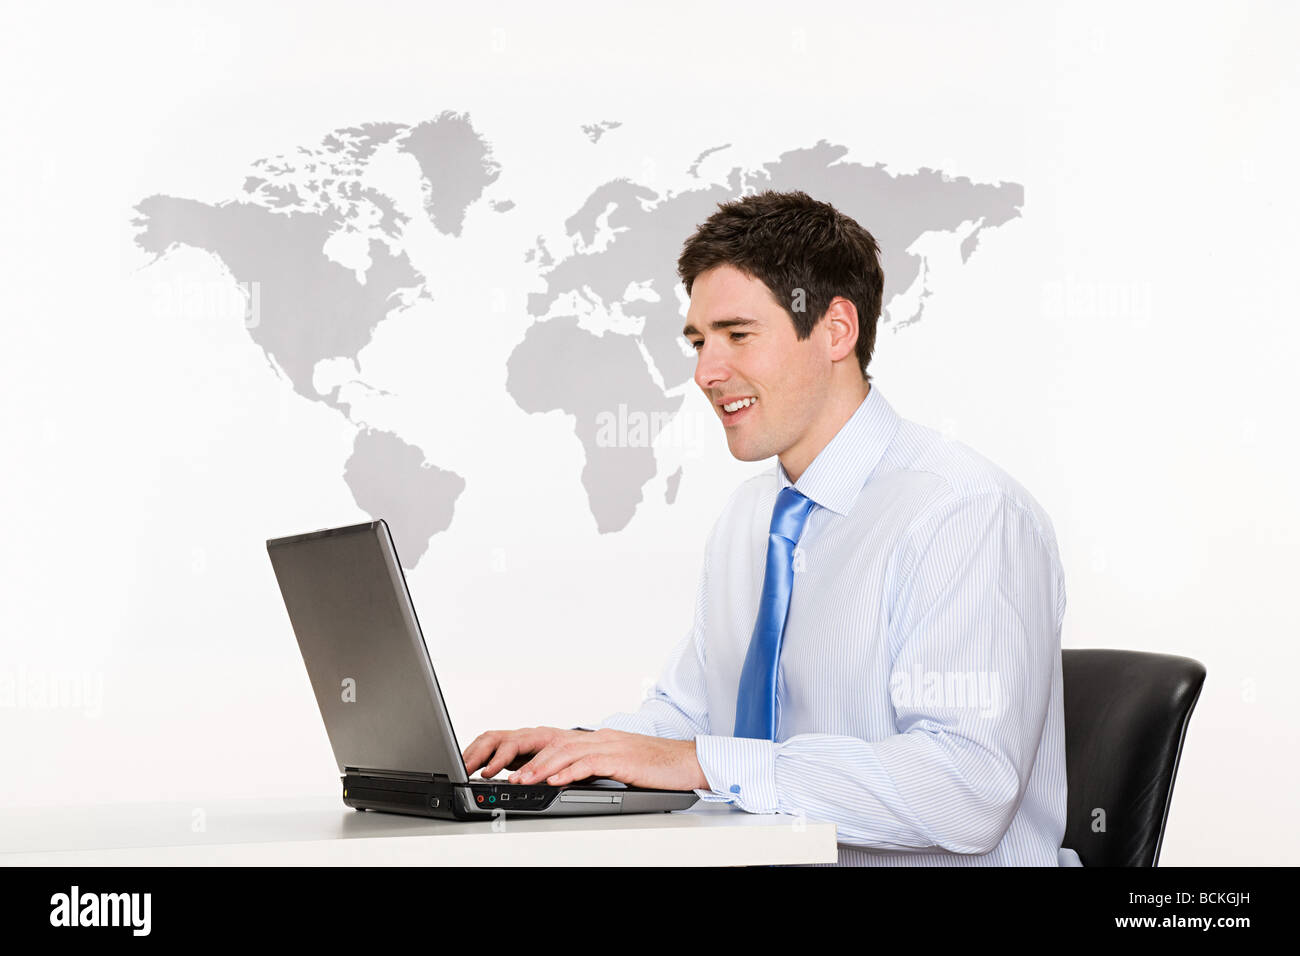 Office worker with laptop and world map Stock Photo